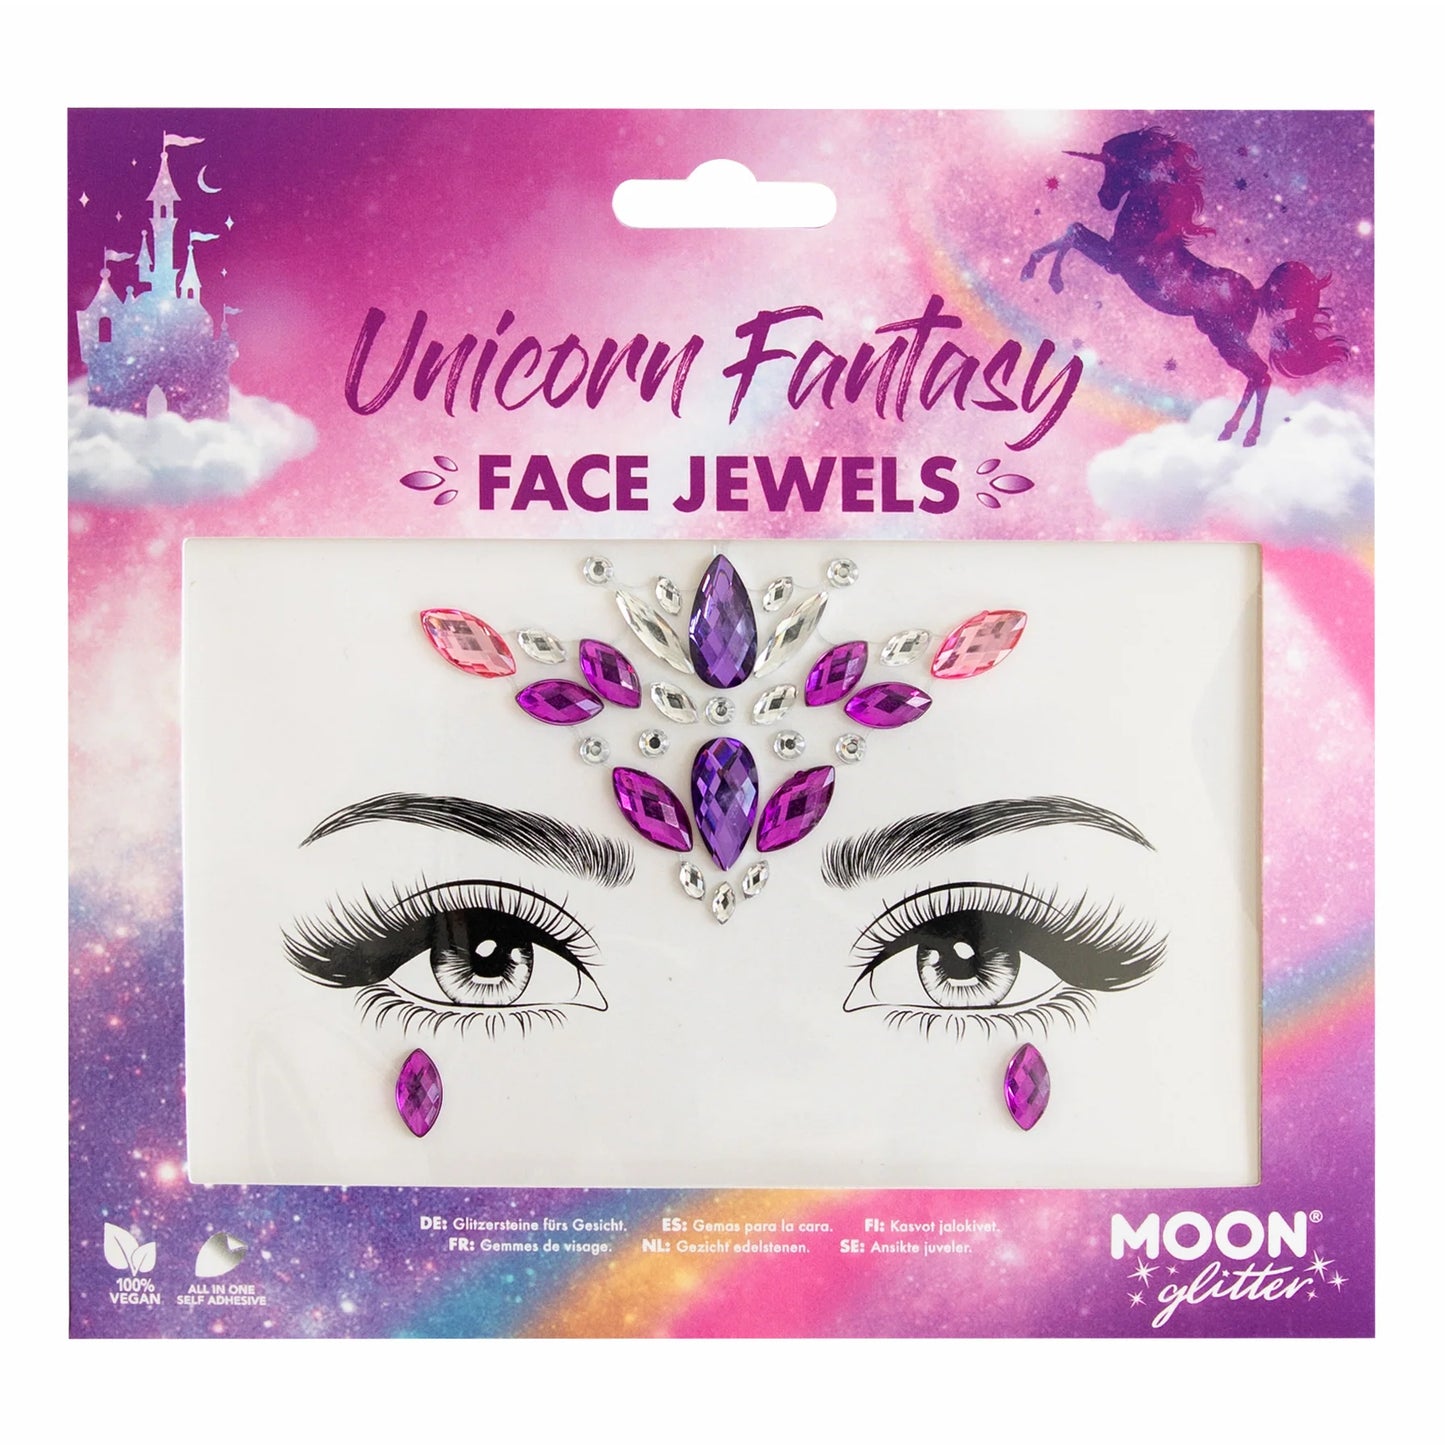 Face Jewels and Face Gems - Unicorn Fantasy